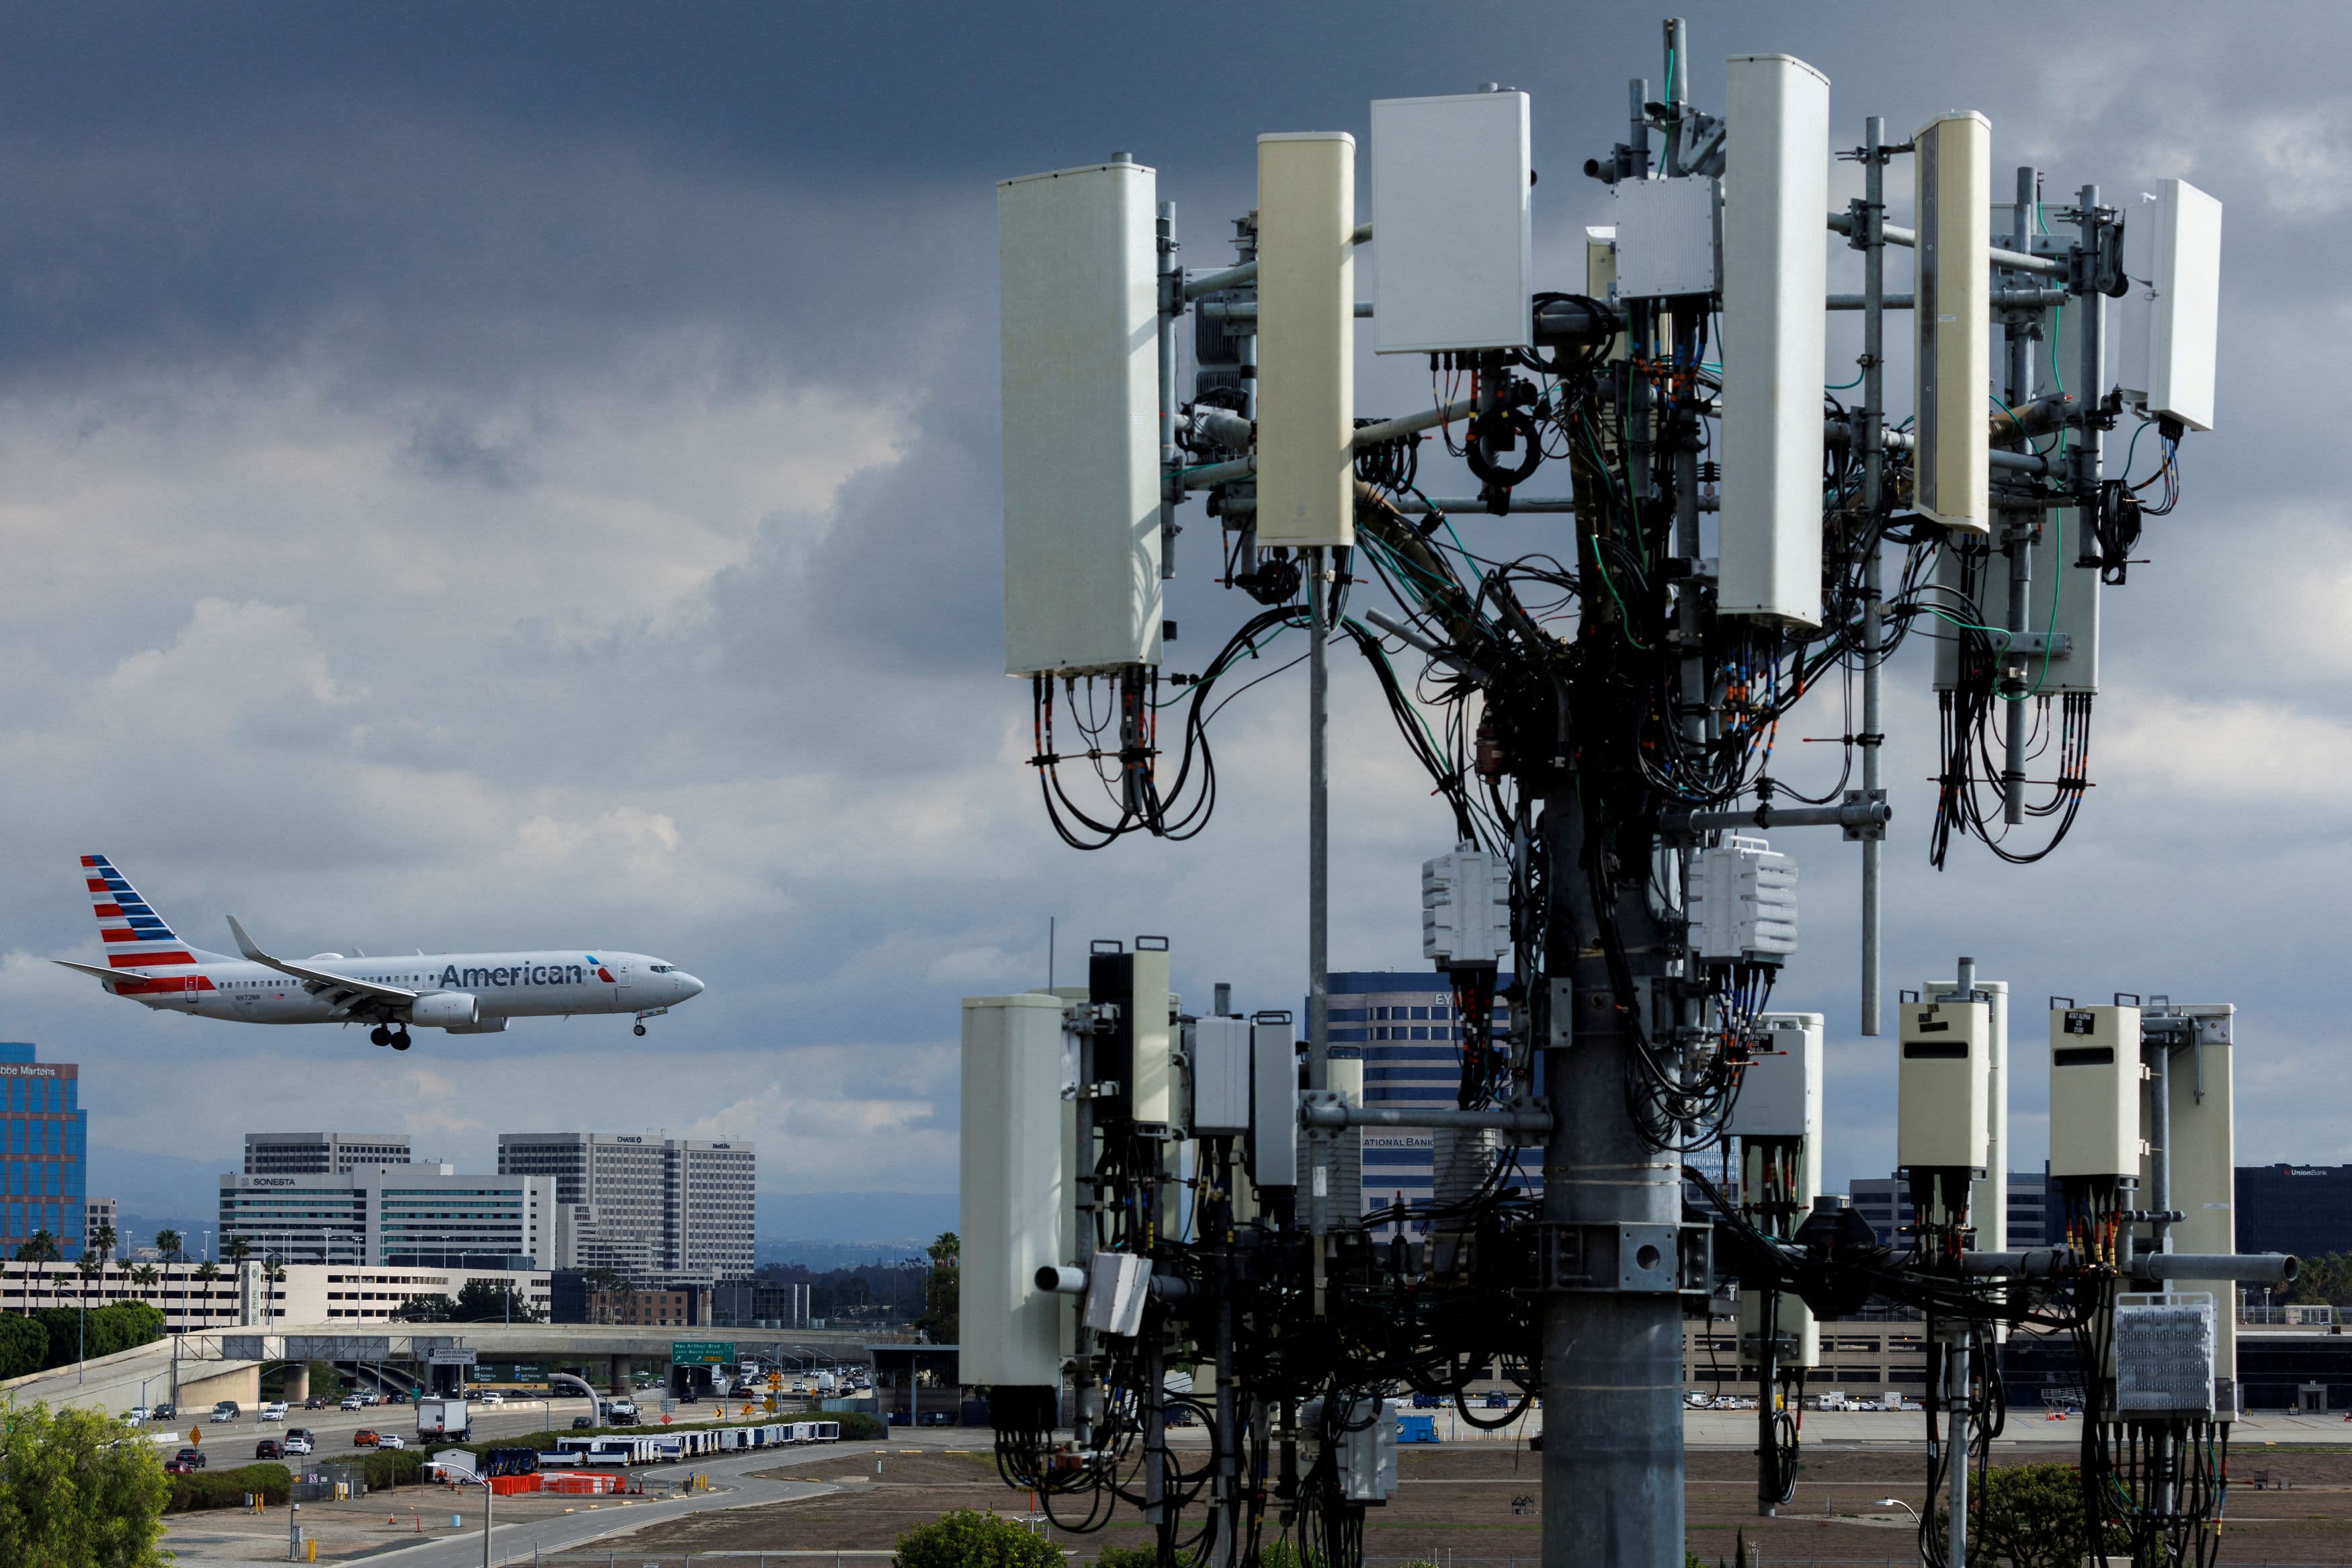 FAA warns 5G-related landing restrictions could divert flights as snow hits airports – CNBC